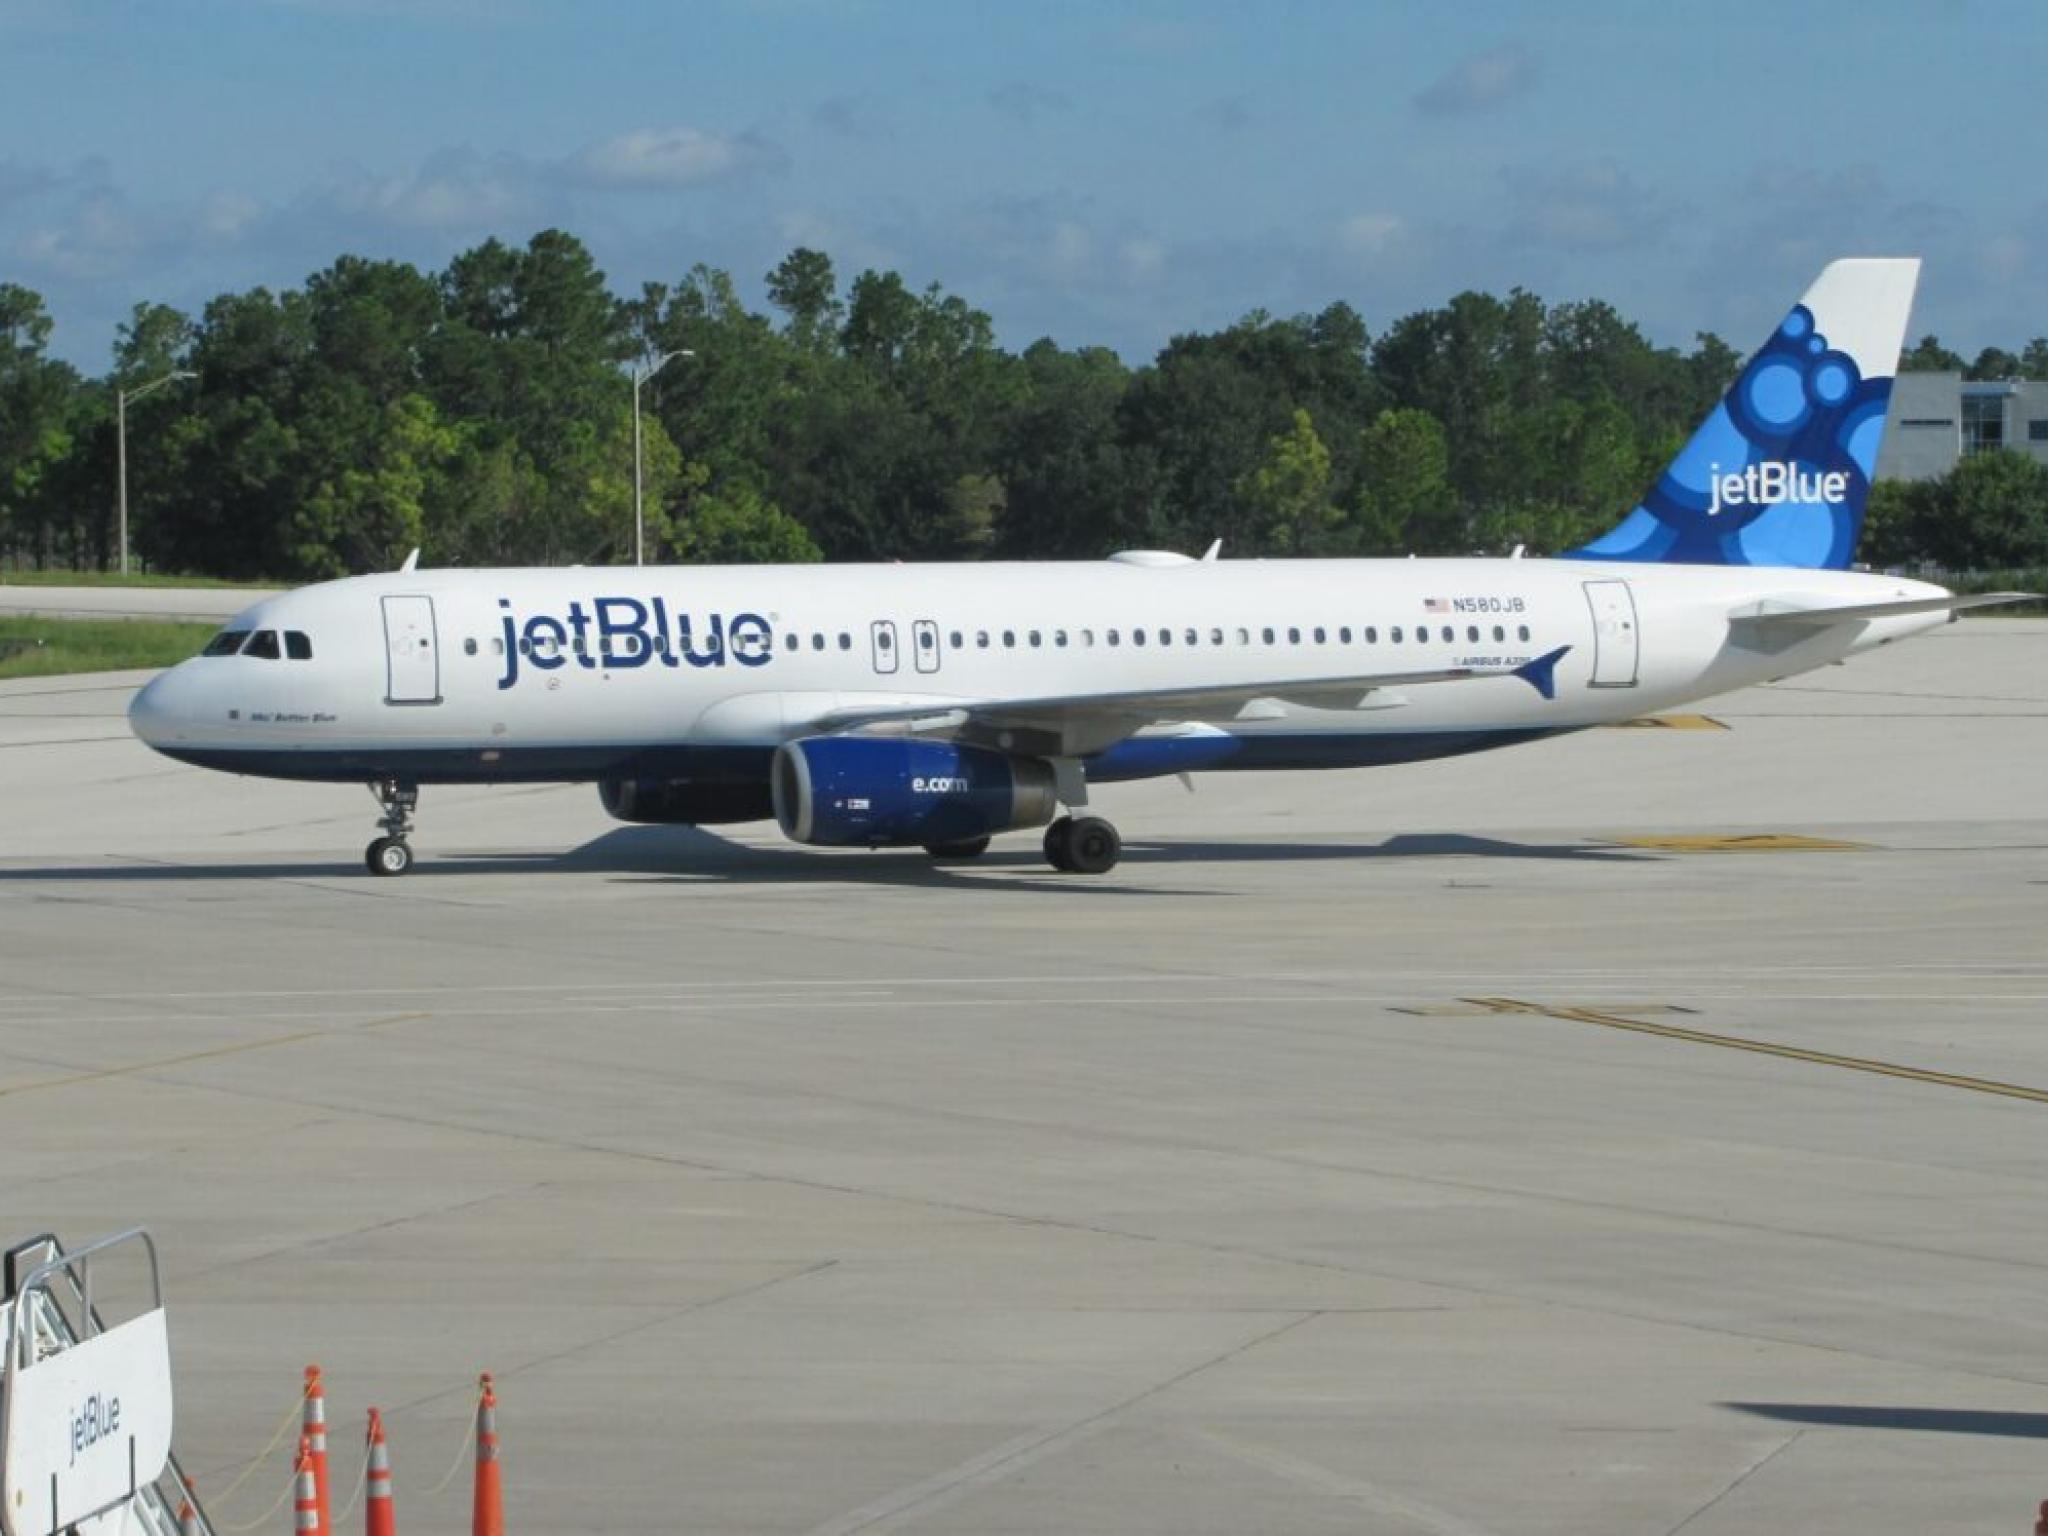  whats-going-on-with-jetblue-airlines-shares-wednesday 